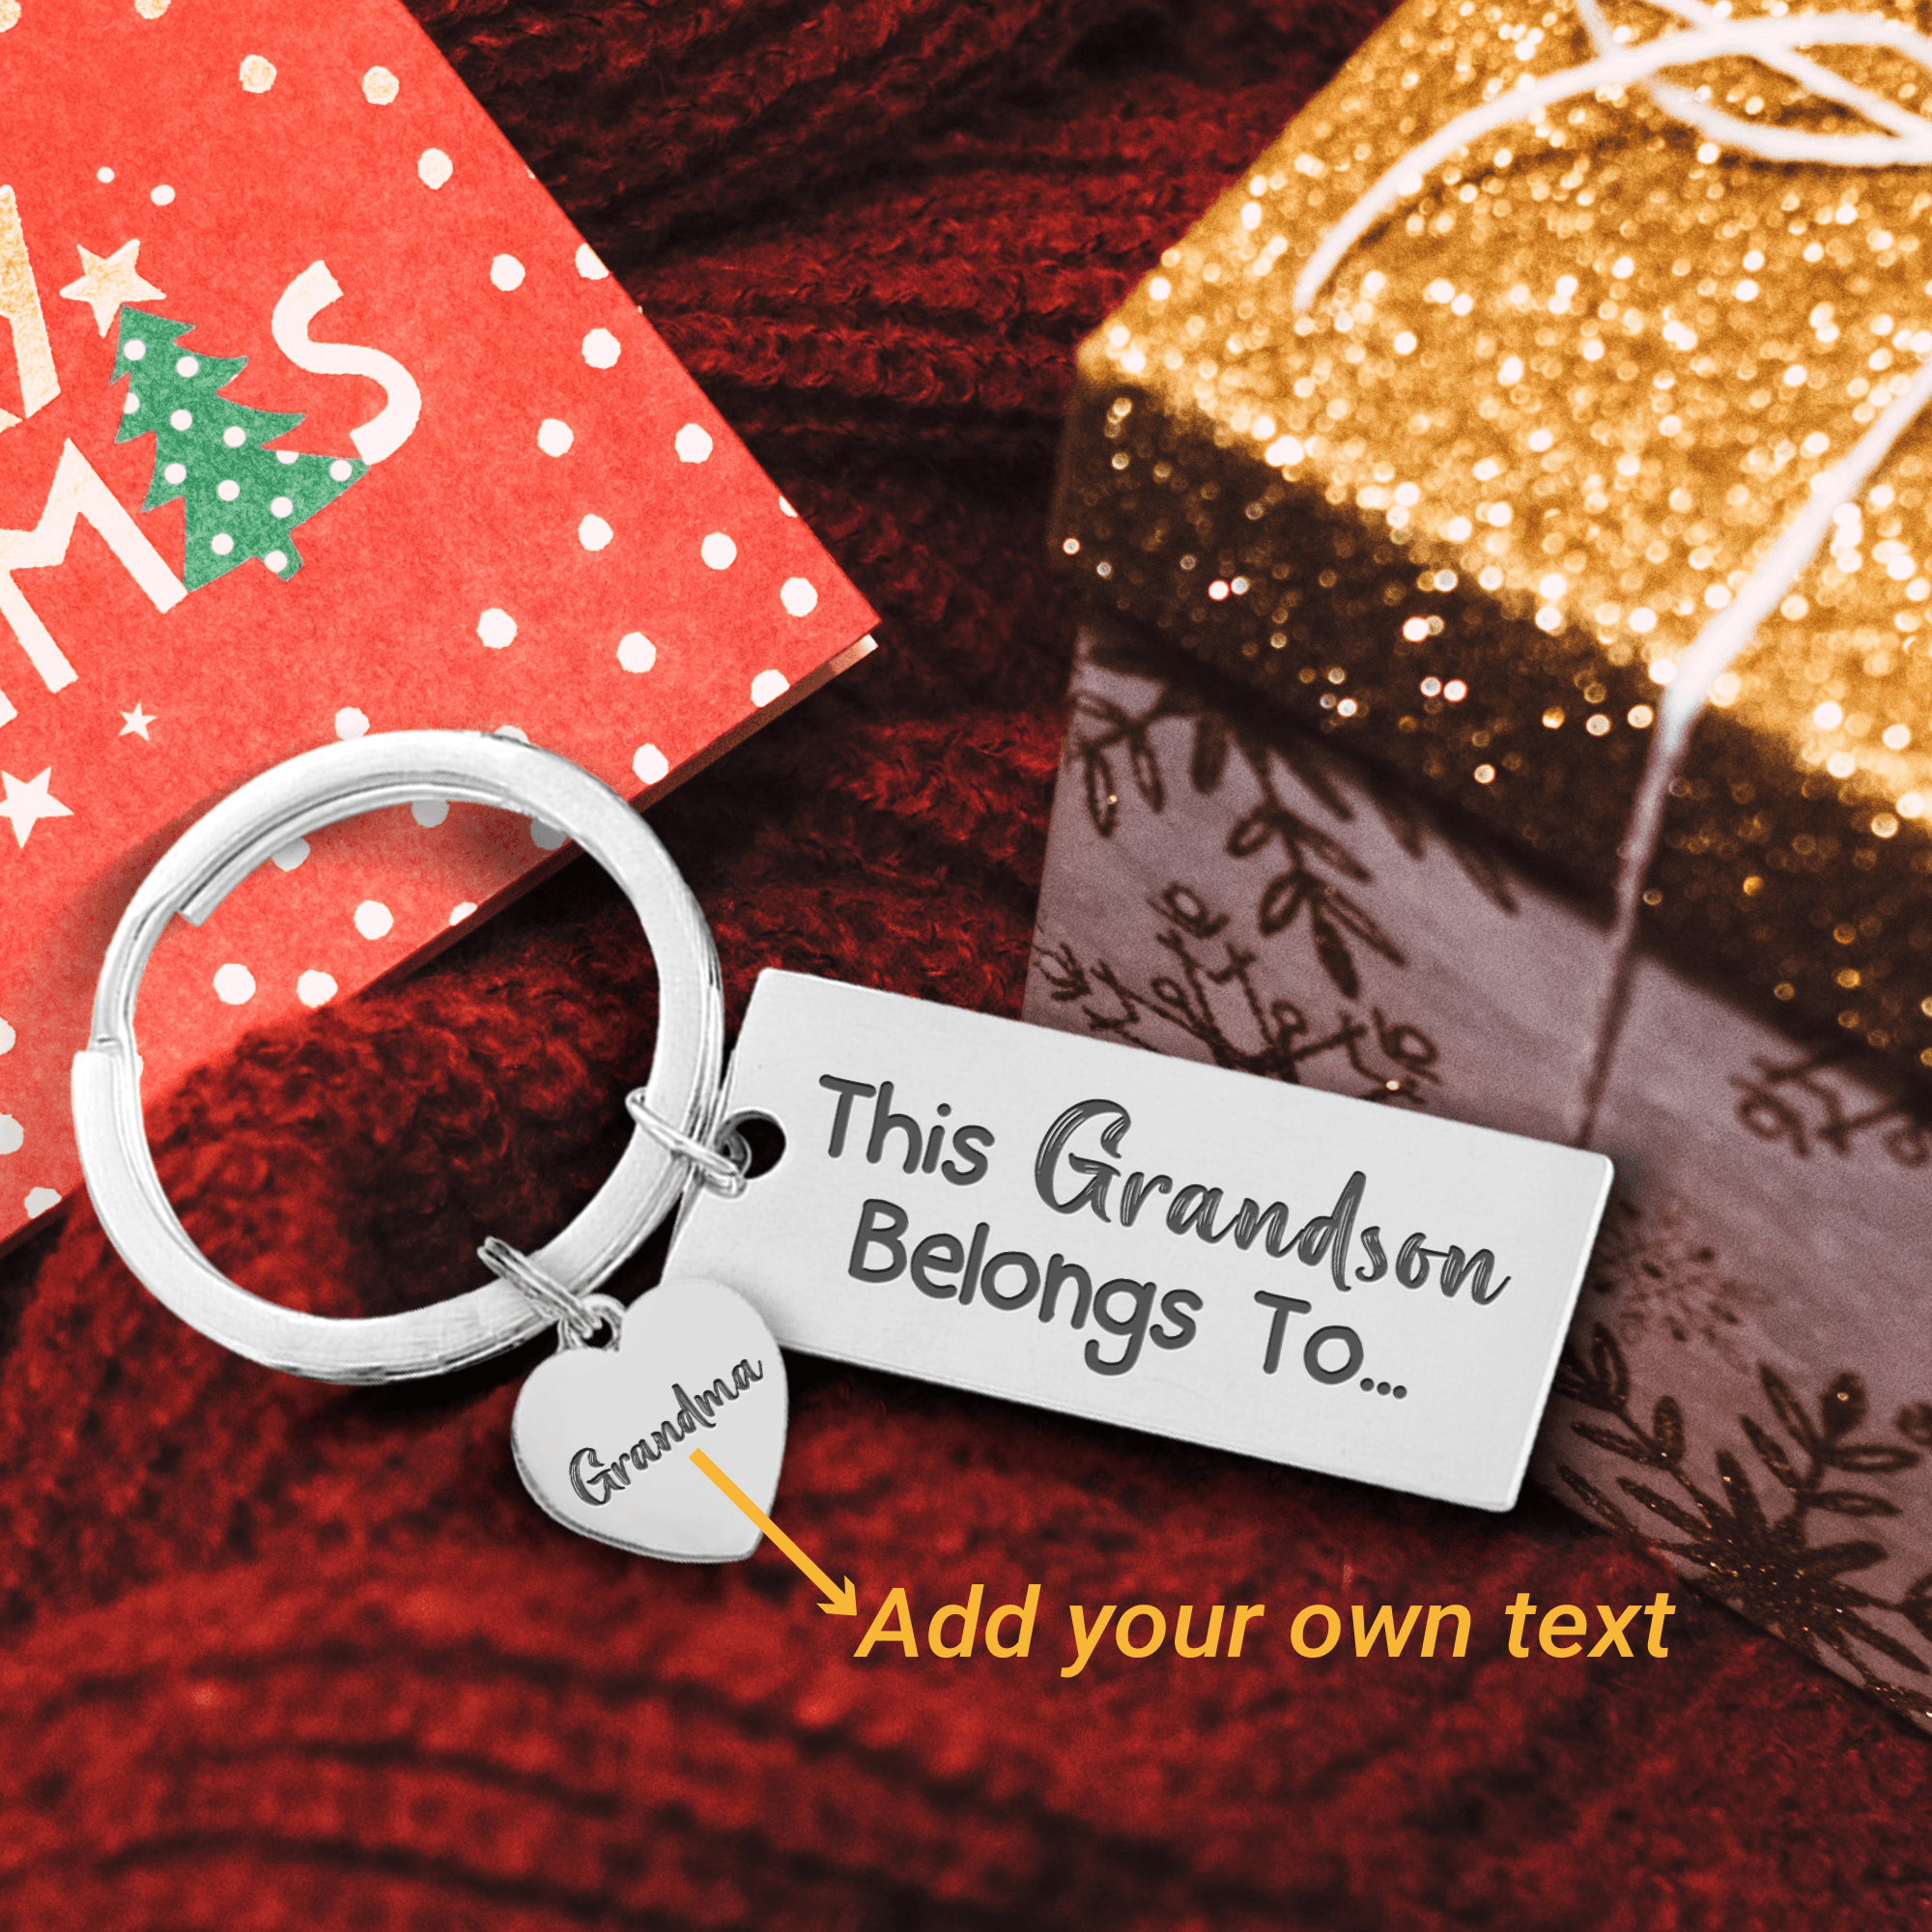 Personalized Engraved Keychain - Family - To My Grandson - I Love You - Augkc22002 - Gifts Holder